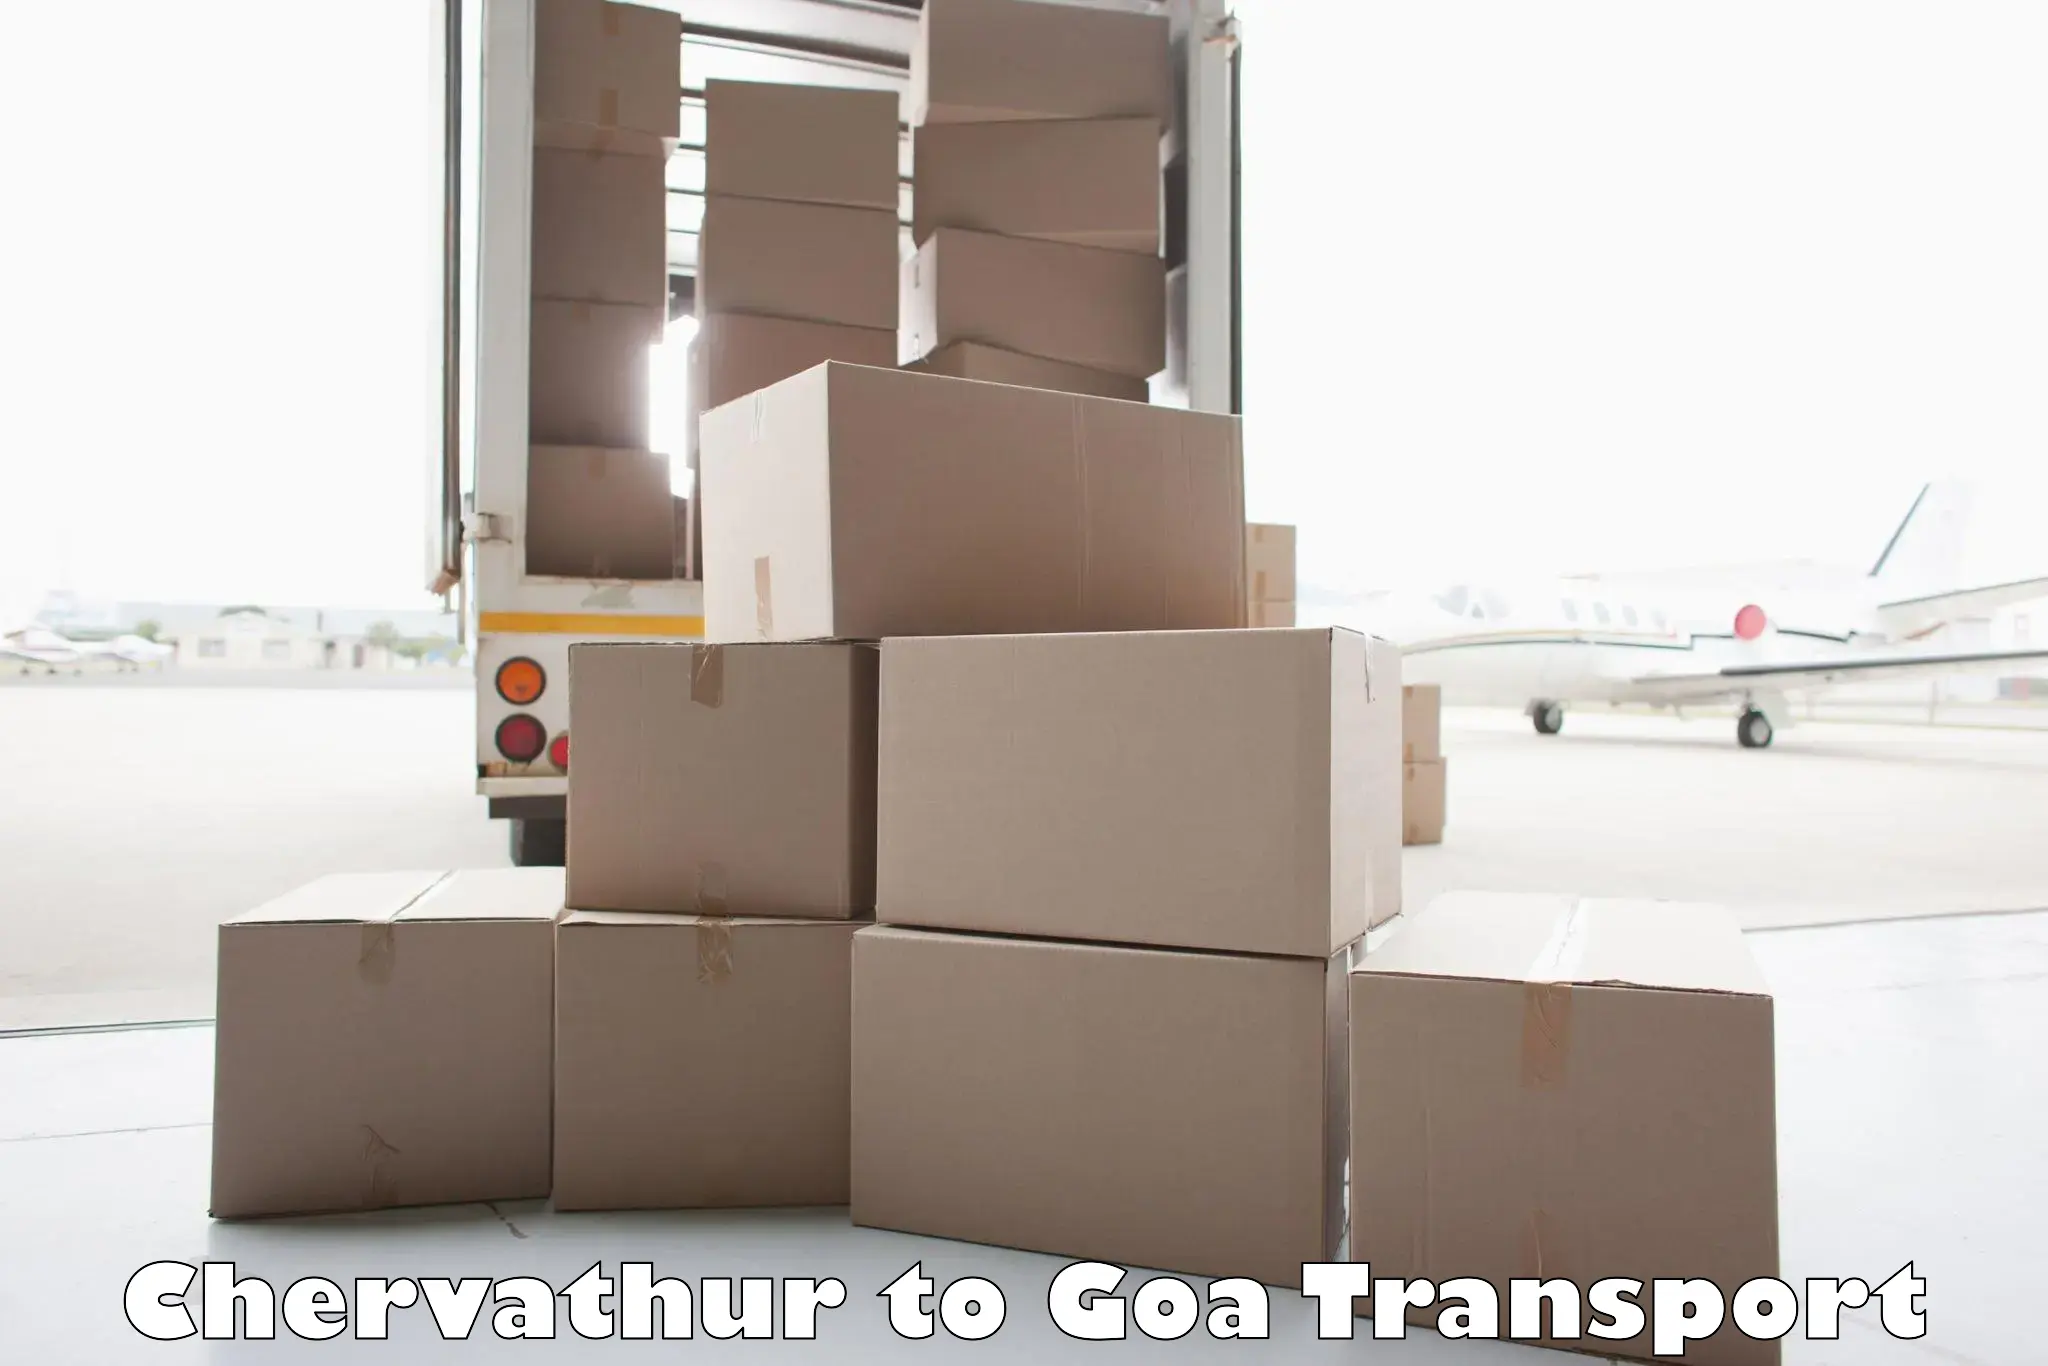 Delivery service Chervathur to Panaji